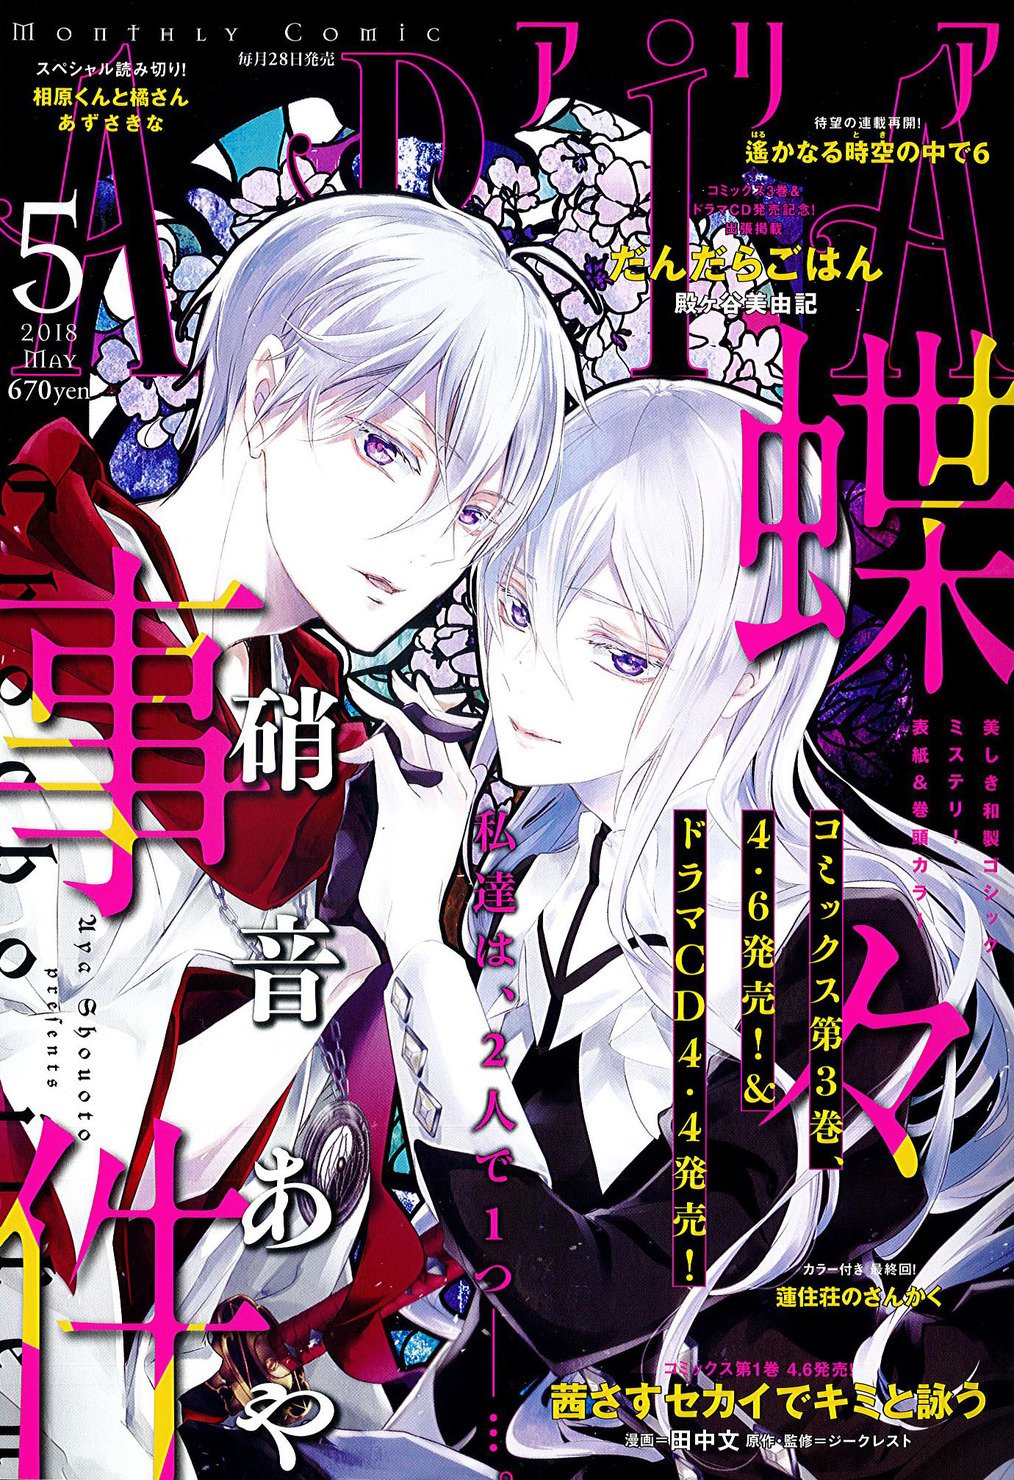 Myanimelist Kodansha S Monthly Shoujo Magazine Aria Will Cease Its Publication The Final Issue Will Ship On April 28 T Co Vygjyu4rze T Co Dskcl1ndz4 Twitter